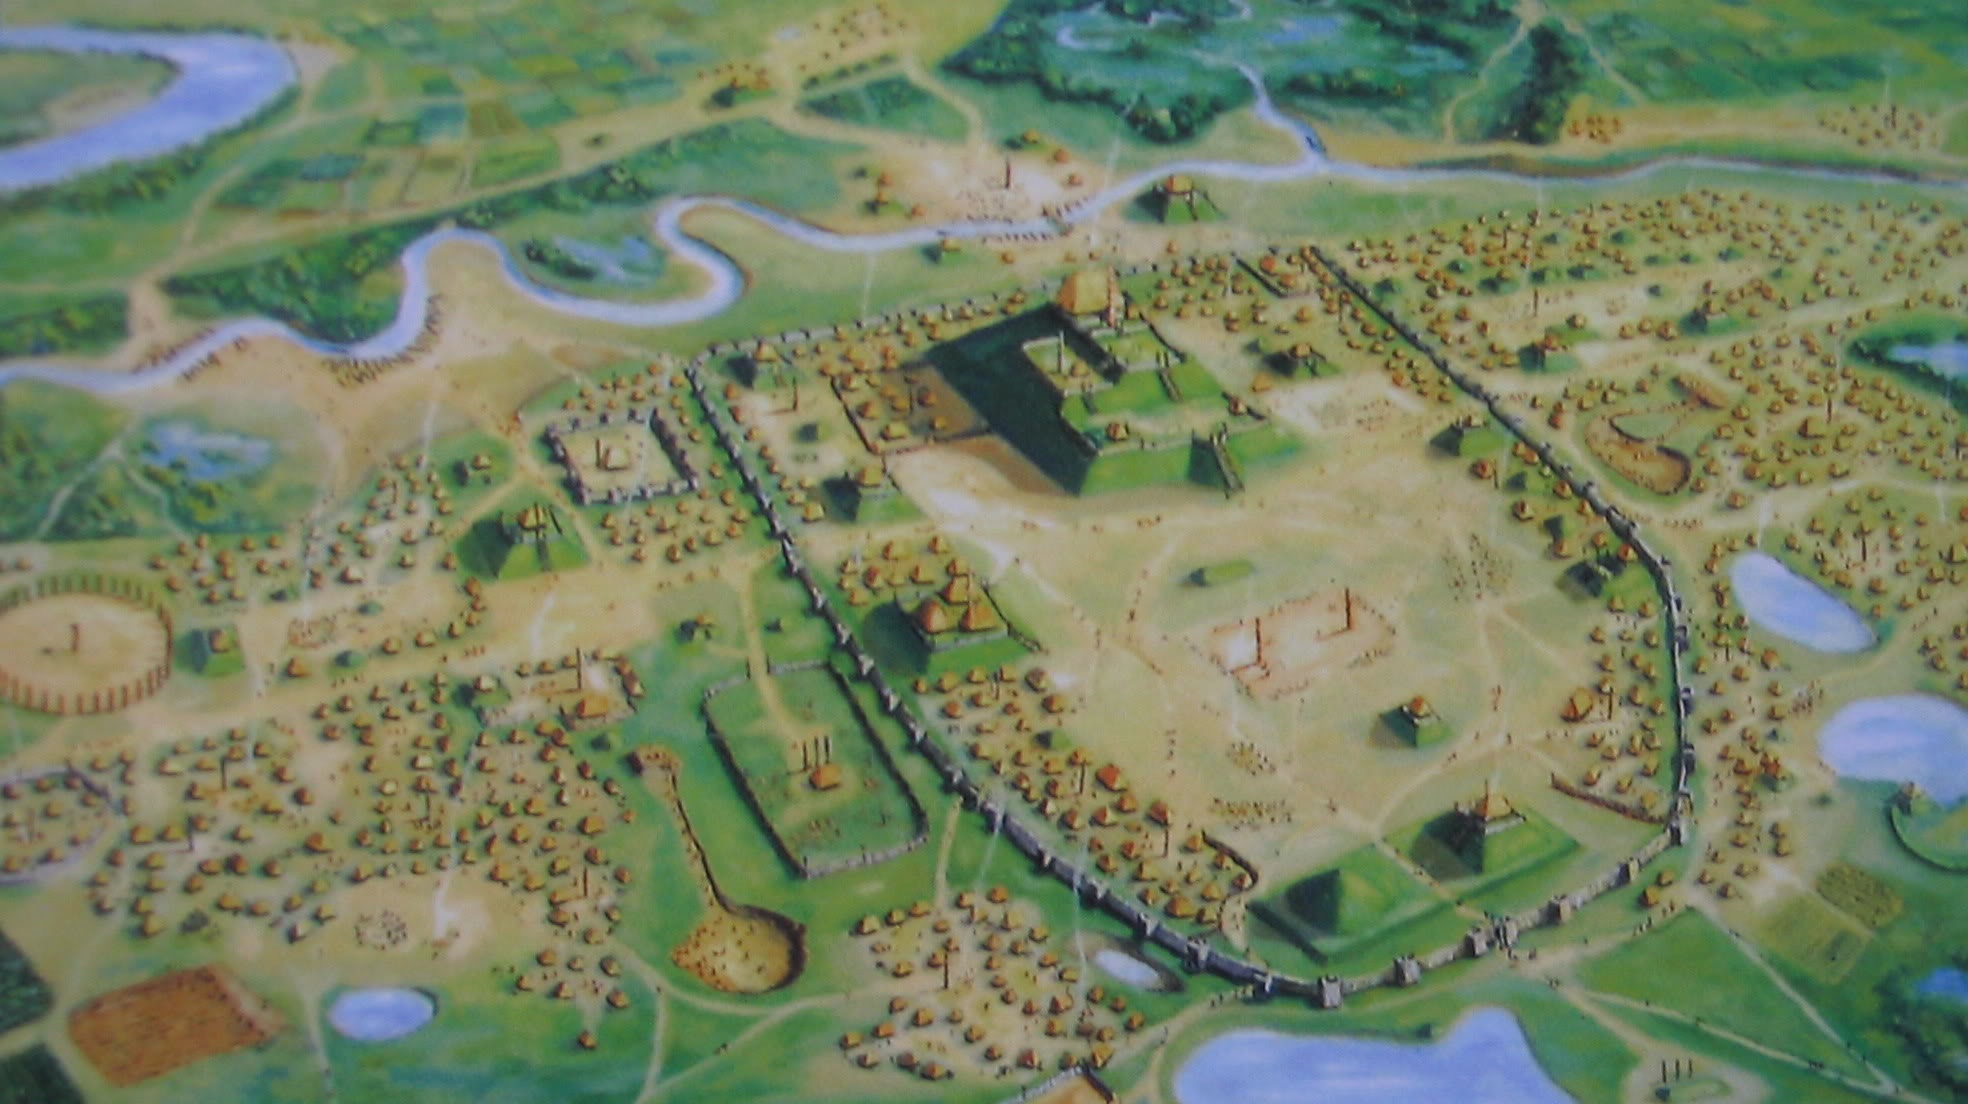 The site of a sprawling pre-Columbian civilization, Cahokia is infamous for its mystery and relative obscurity.